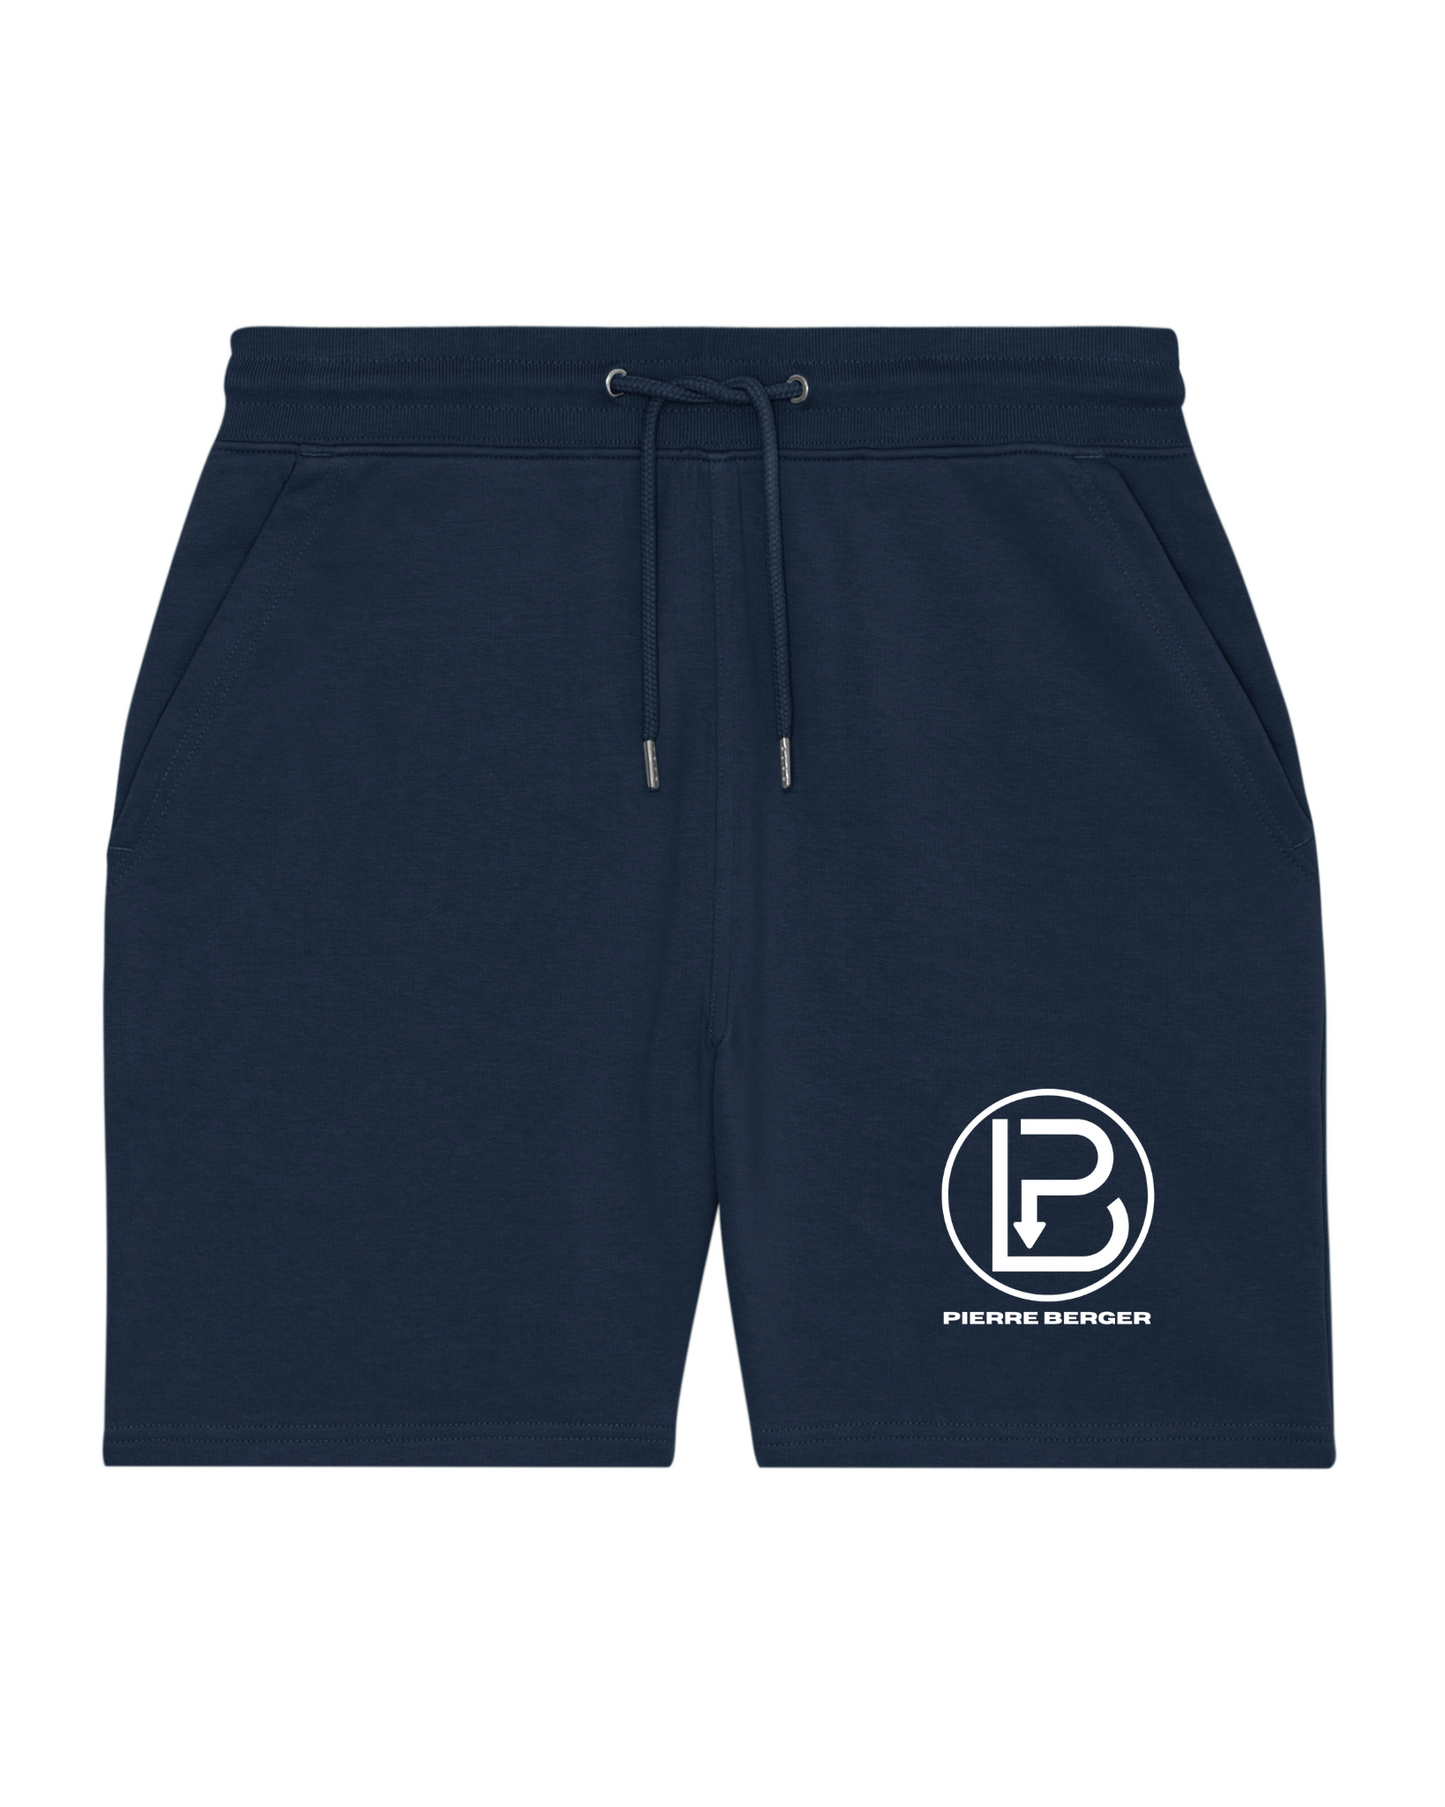 PIERRE BERGER - Unisex jogging shorts 100% recycled embroidery